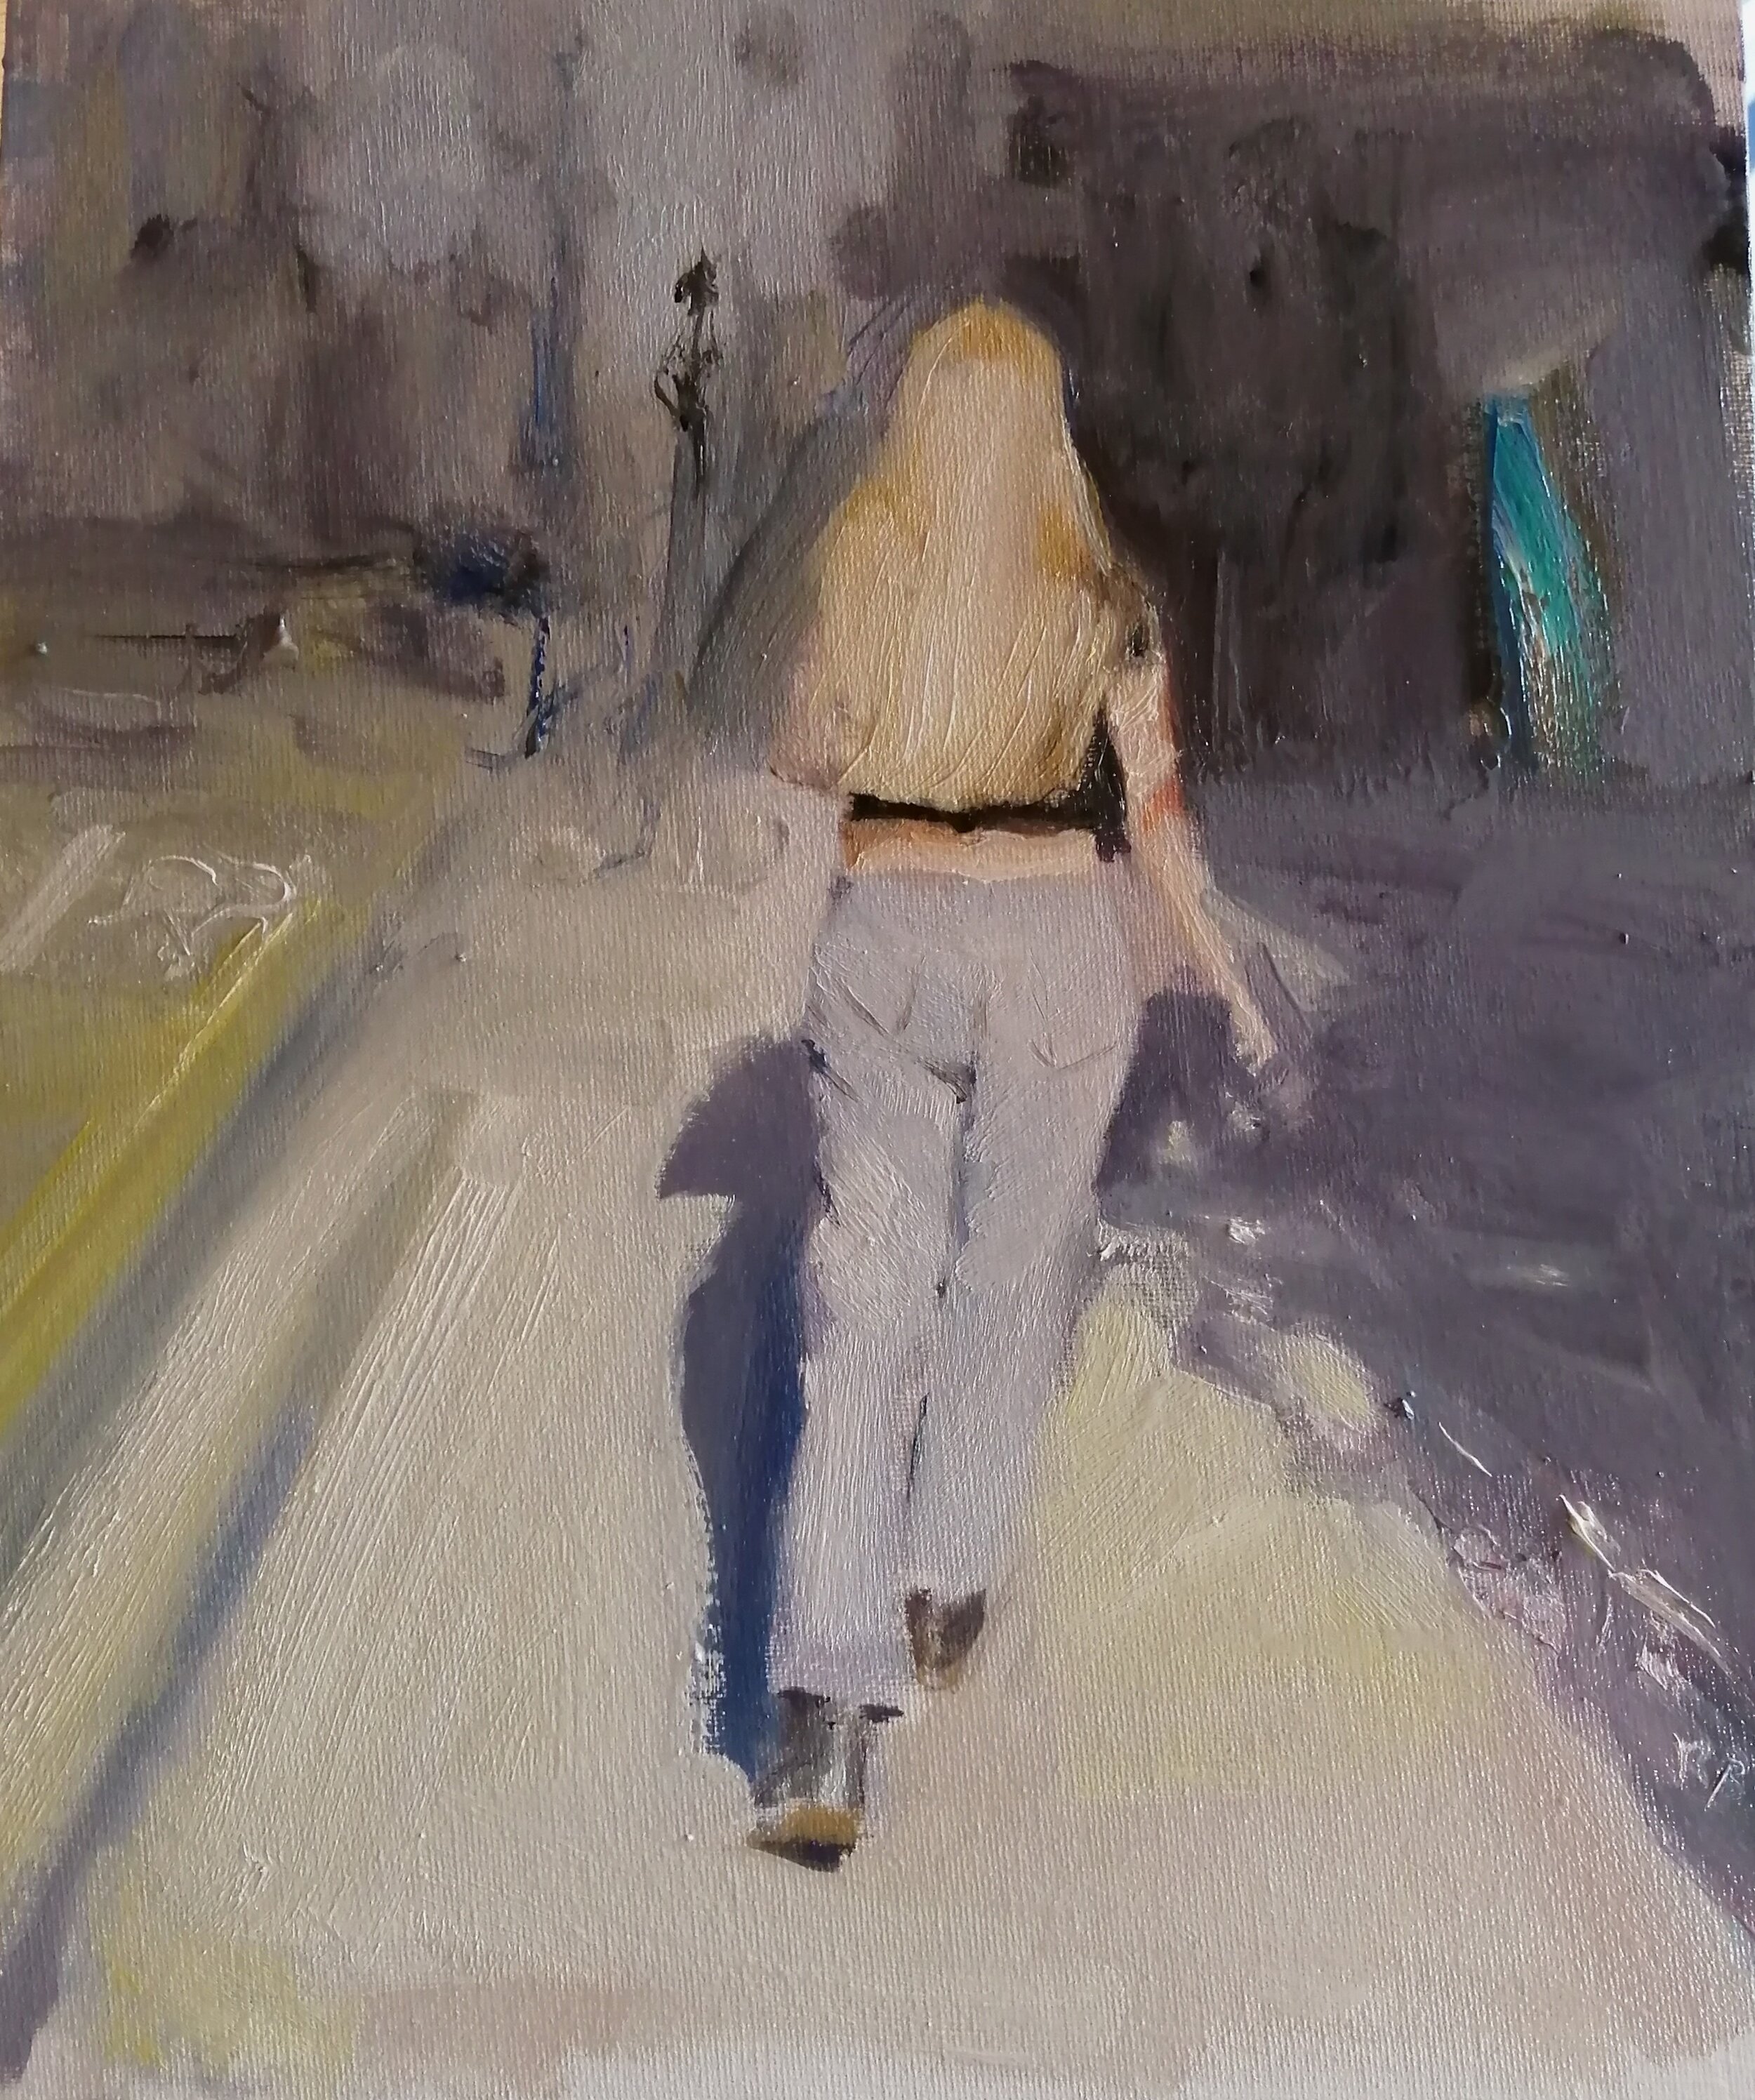  Long London shadows  Oil on board  26x31 cm  £400  Late September shadows on a London street, and a girl with spectacular blonde hair walking briskly in the sunshine. Painted in an impressionist style with the intention to highlight the girl's golde